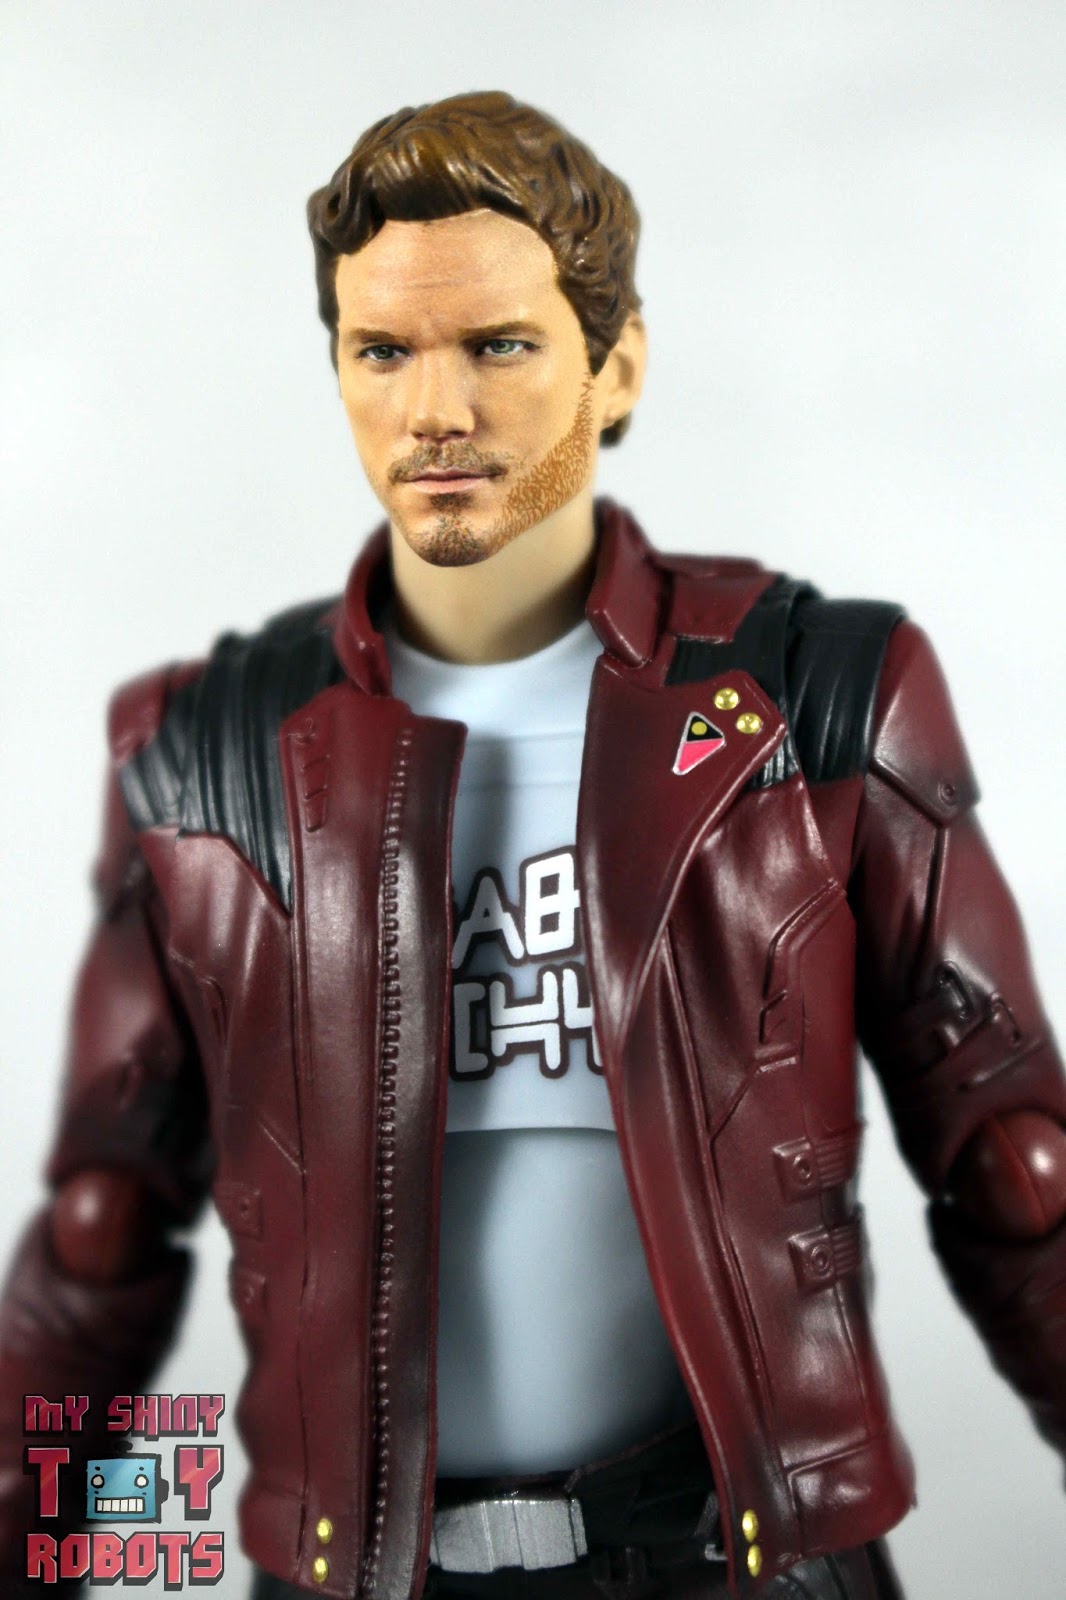 Marvel Legends Star Lord Guardians of the Galaxy Vol 2 Movie Chris Pratt  Action Figure Toy Review 